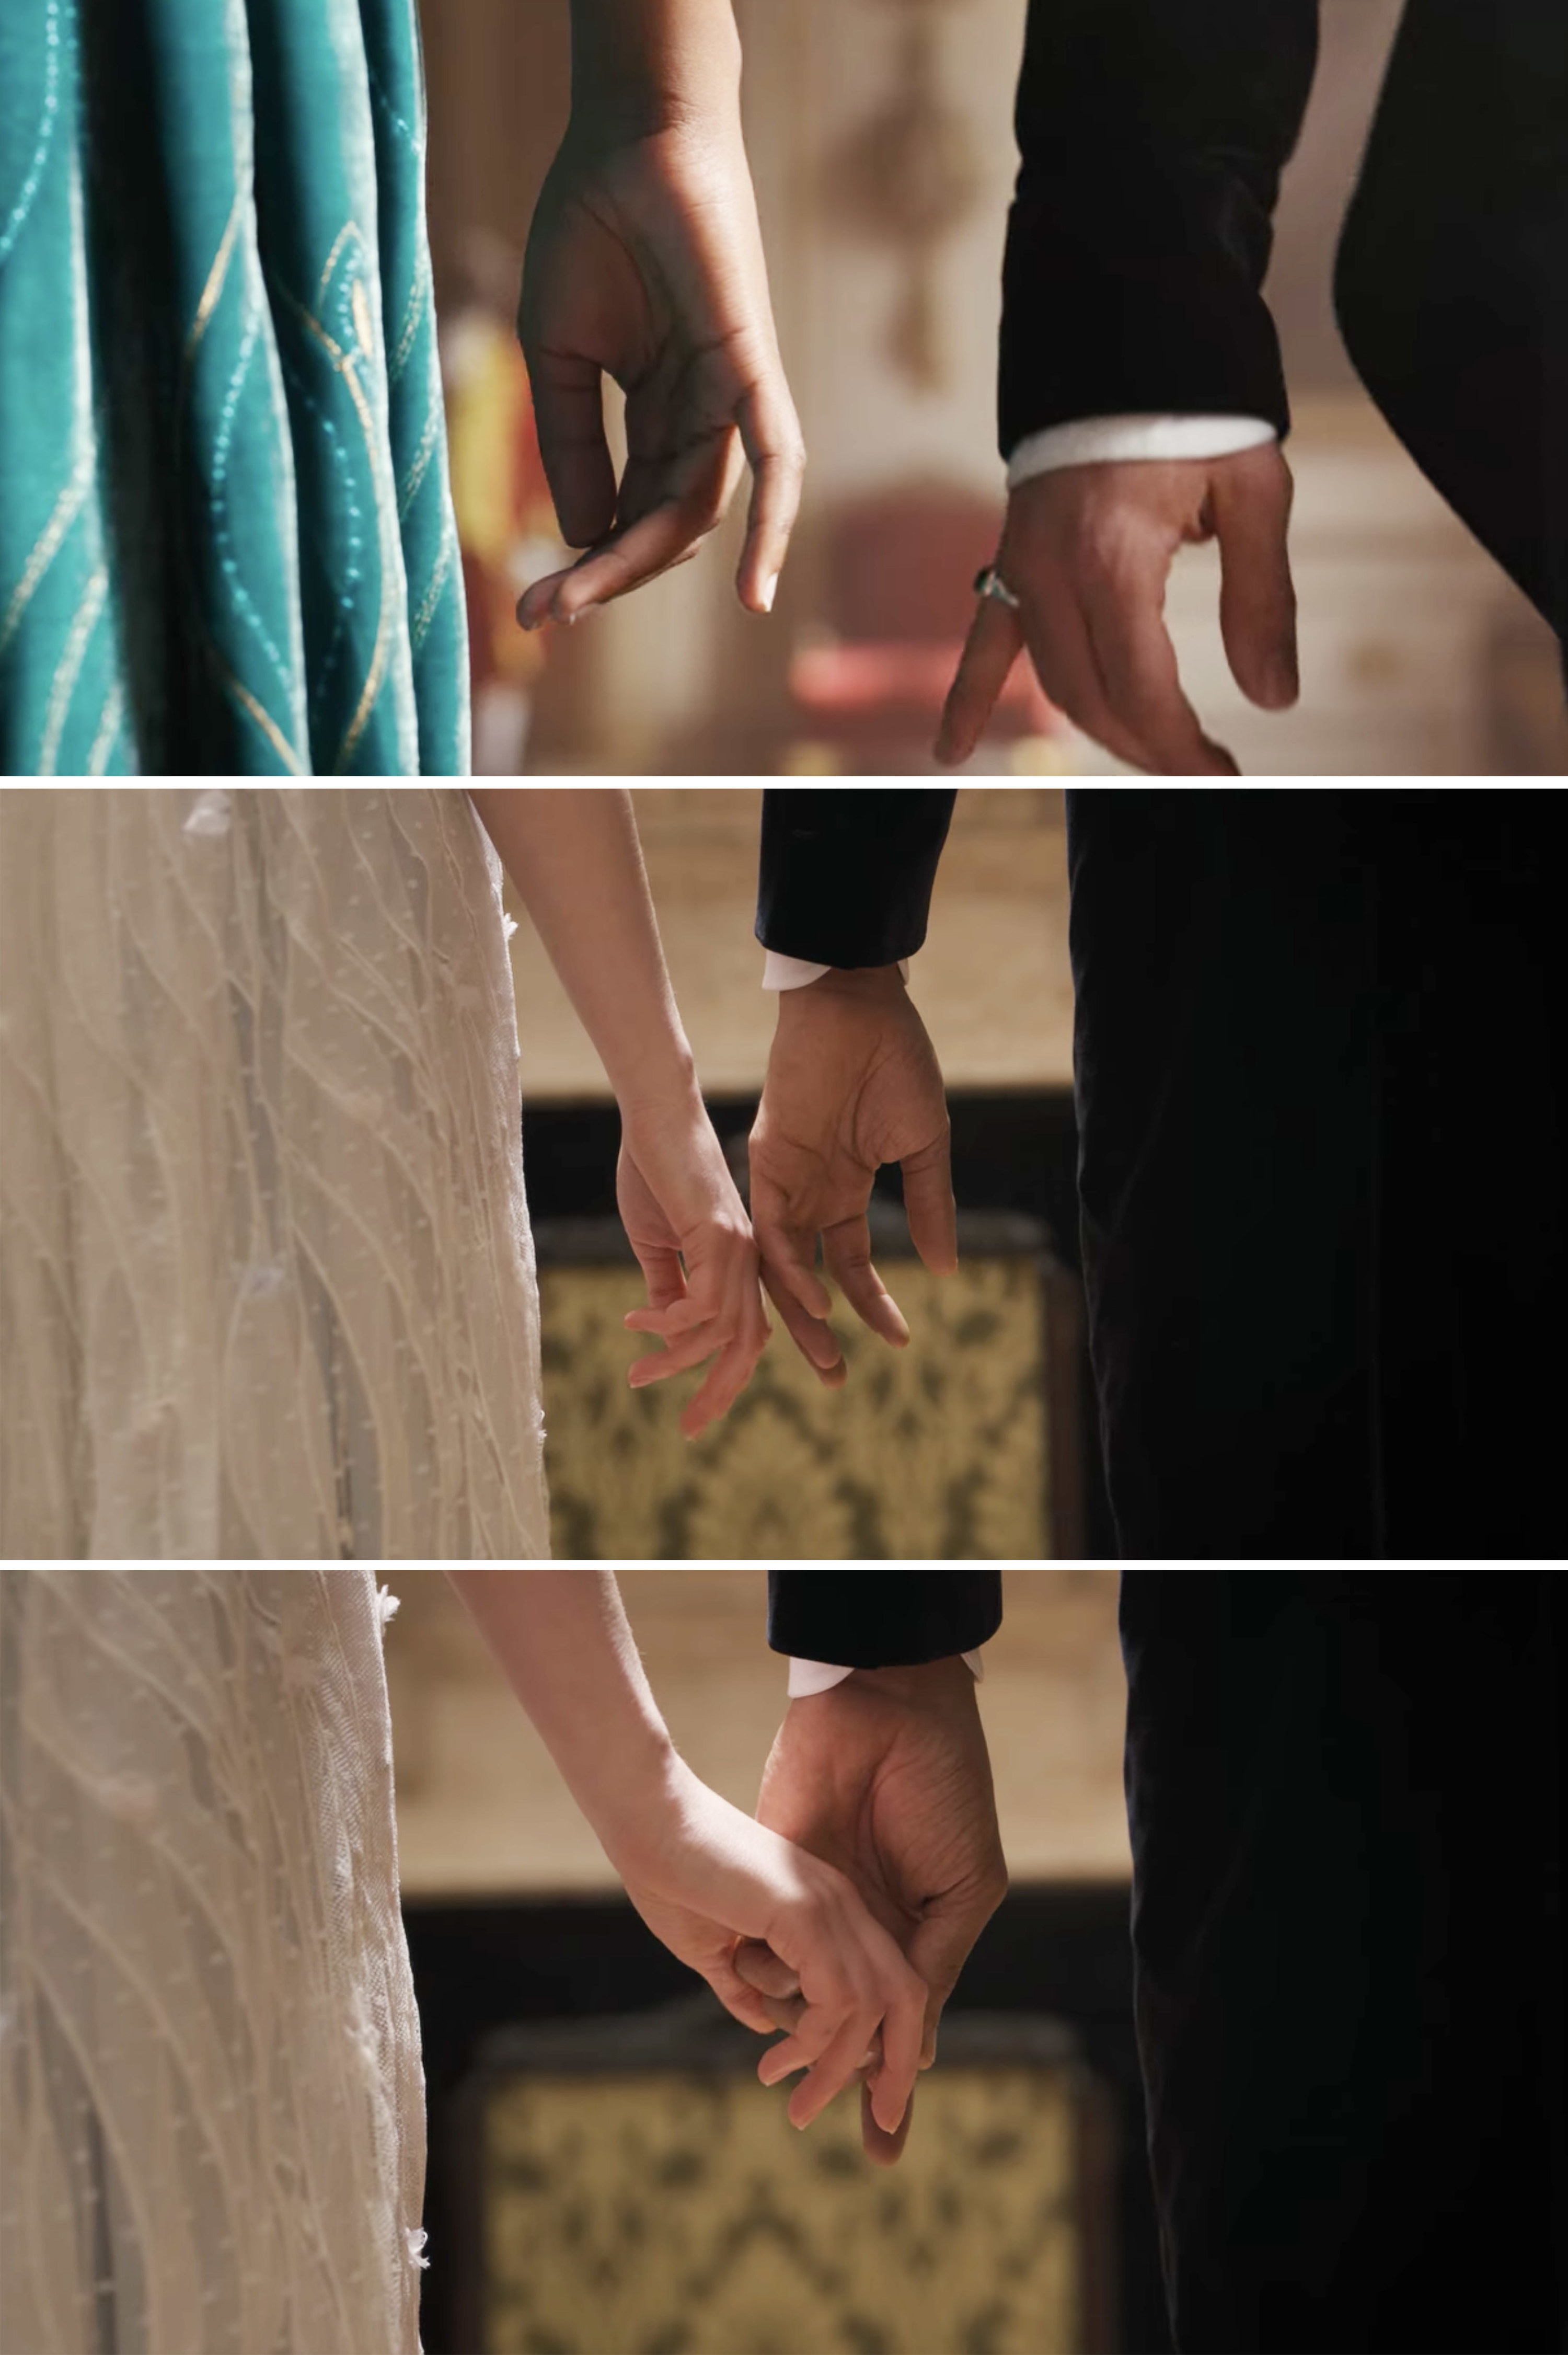 The shot of Anthony and Kate&#x27;s pinkies and shots of Daphne and Simon&#x27;s hands touching in Season 1